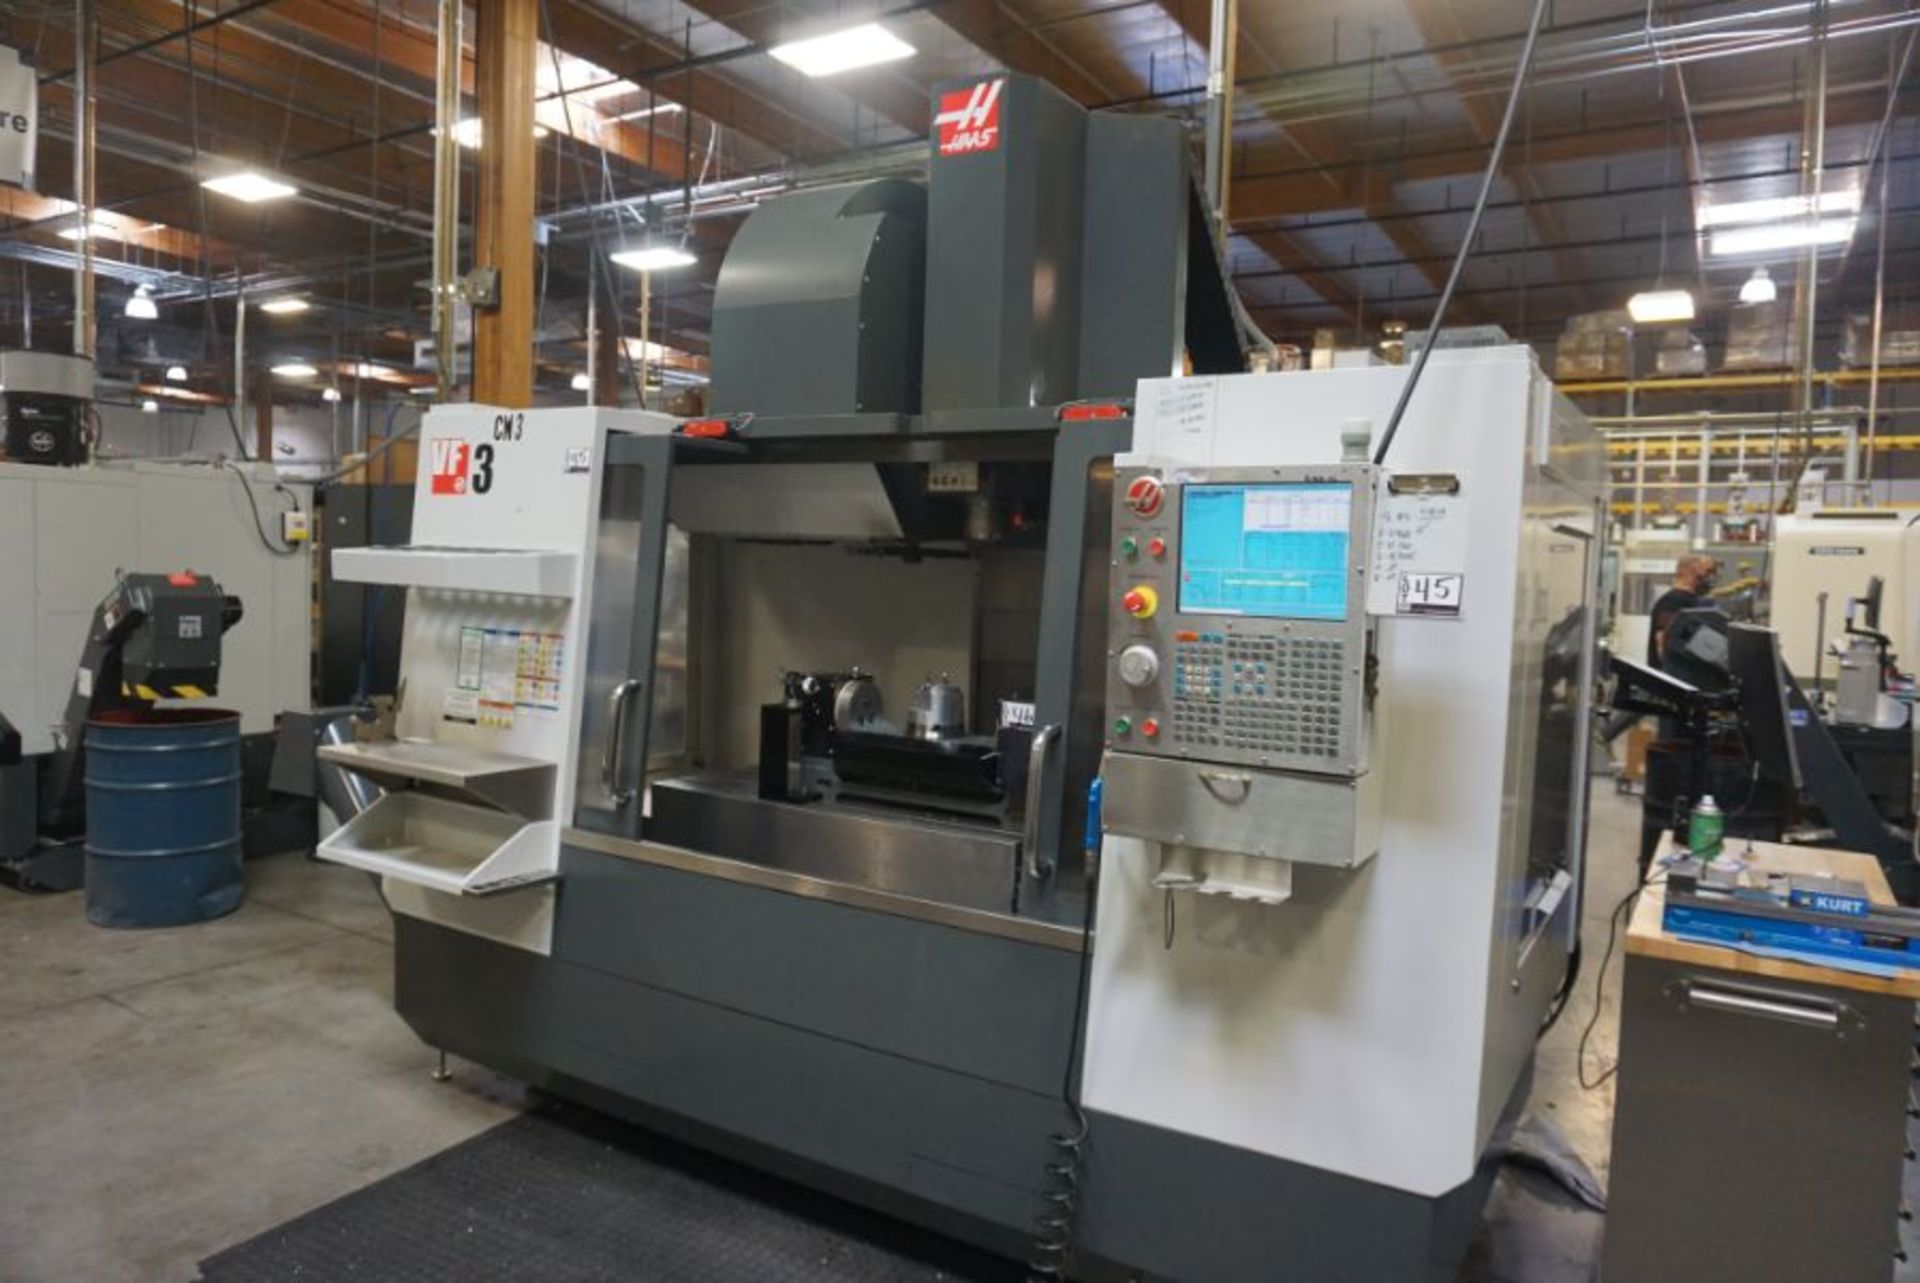 Haas VF-3 Vertical Machining Center, New 2011 - Image 3 of 7